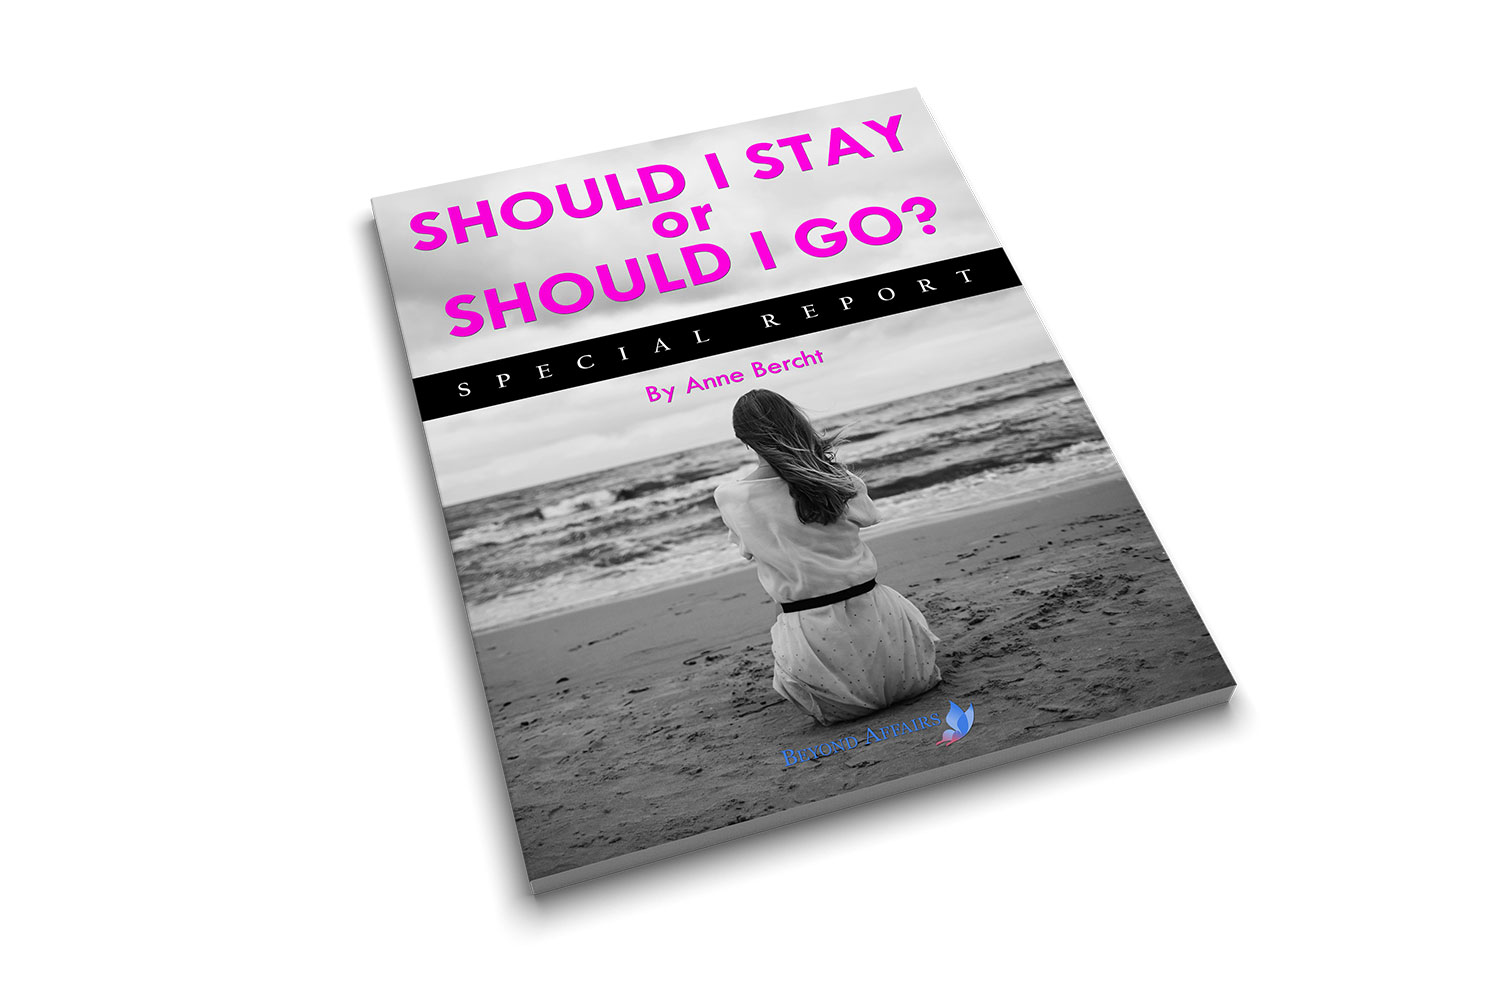 Beyond Affairs special report titled Should I Stay or Should I Go for betrayed women or men